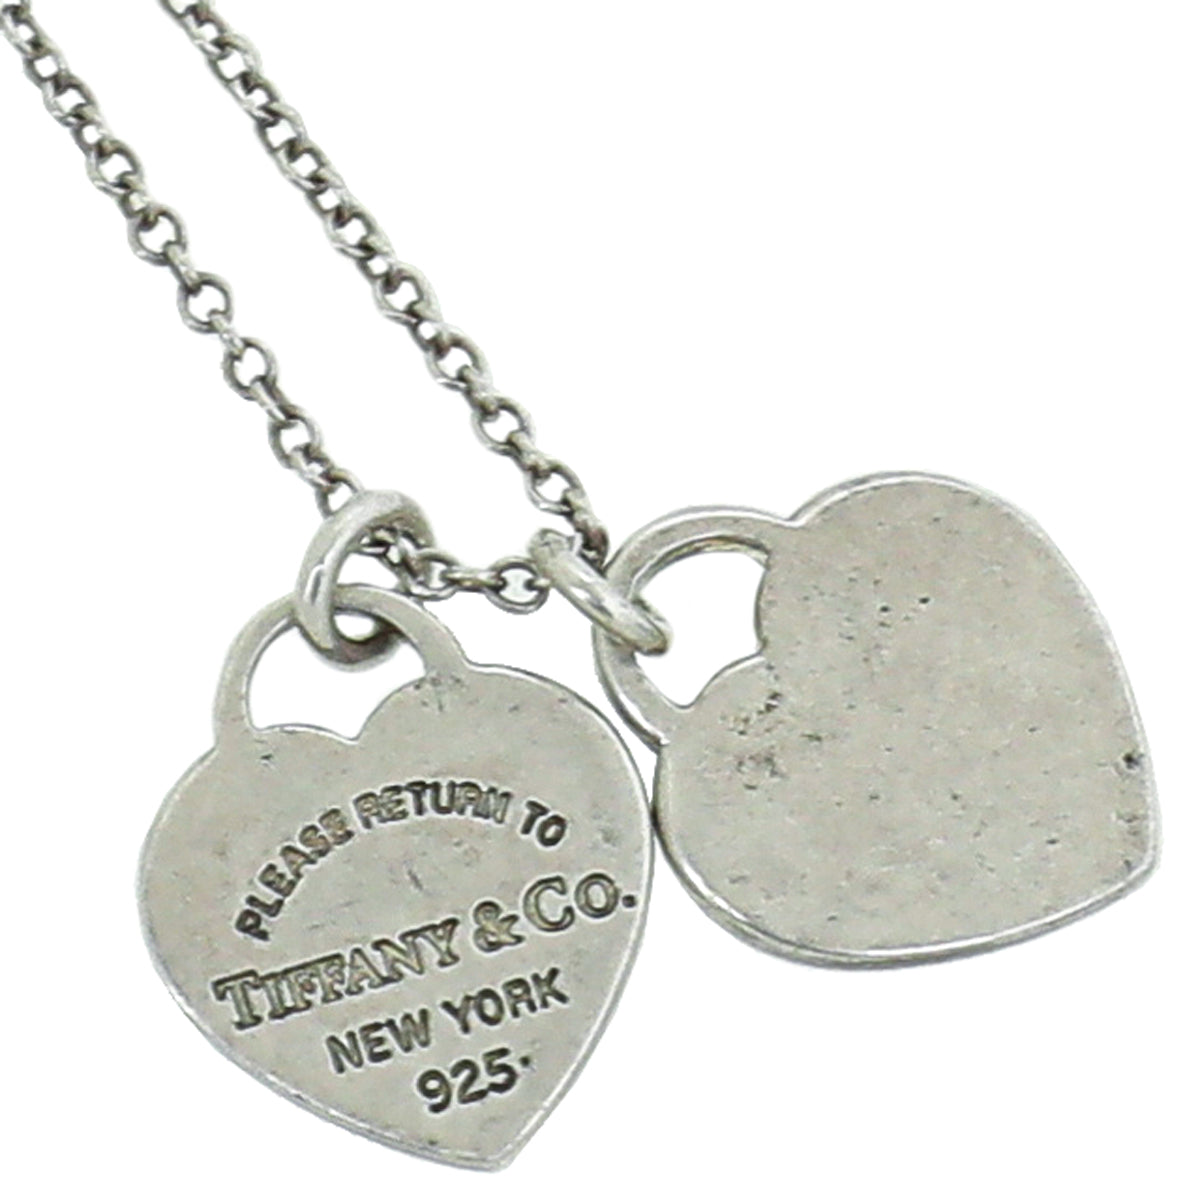 Tiffany & Co Sterling Silver Double Mini Heart Tag Necklace